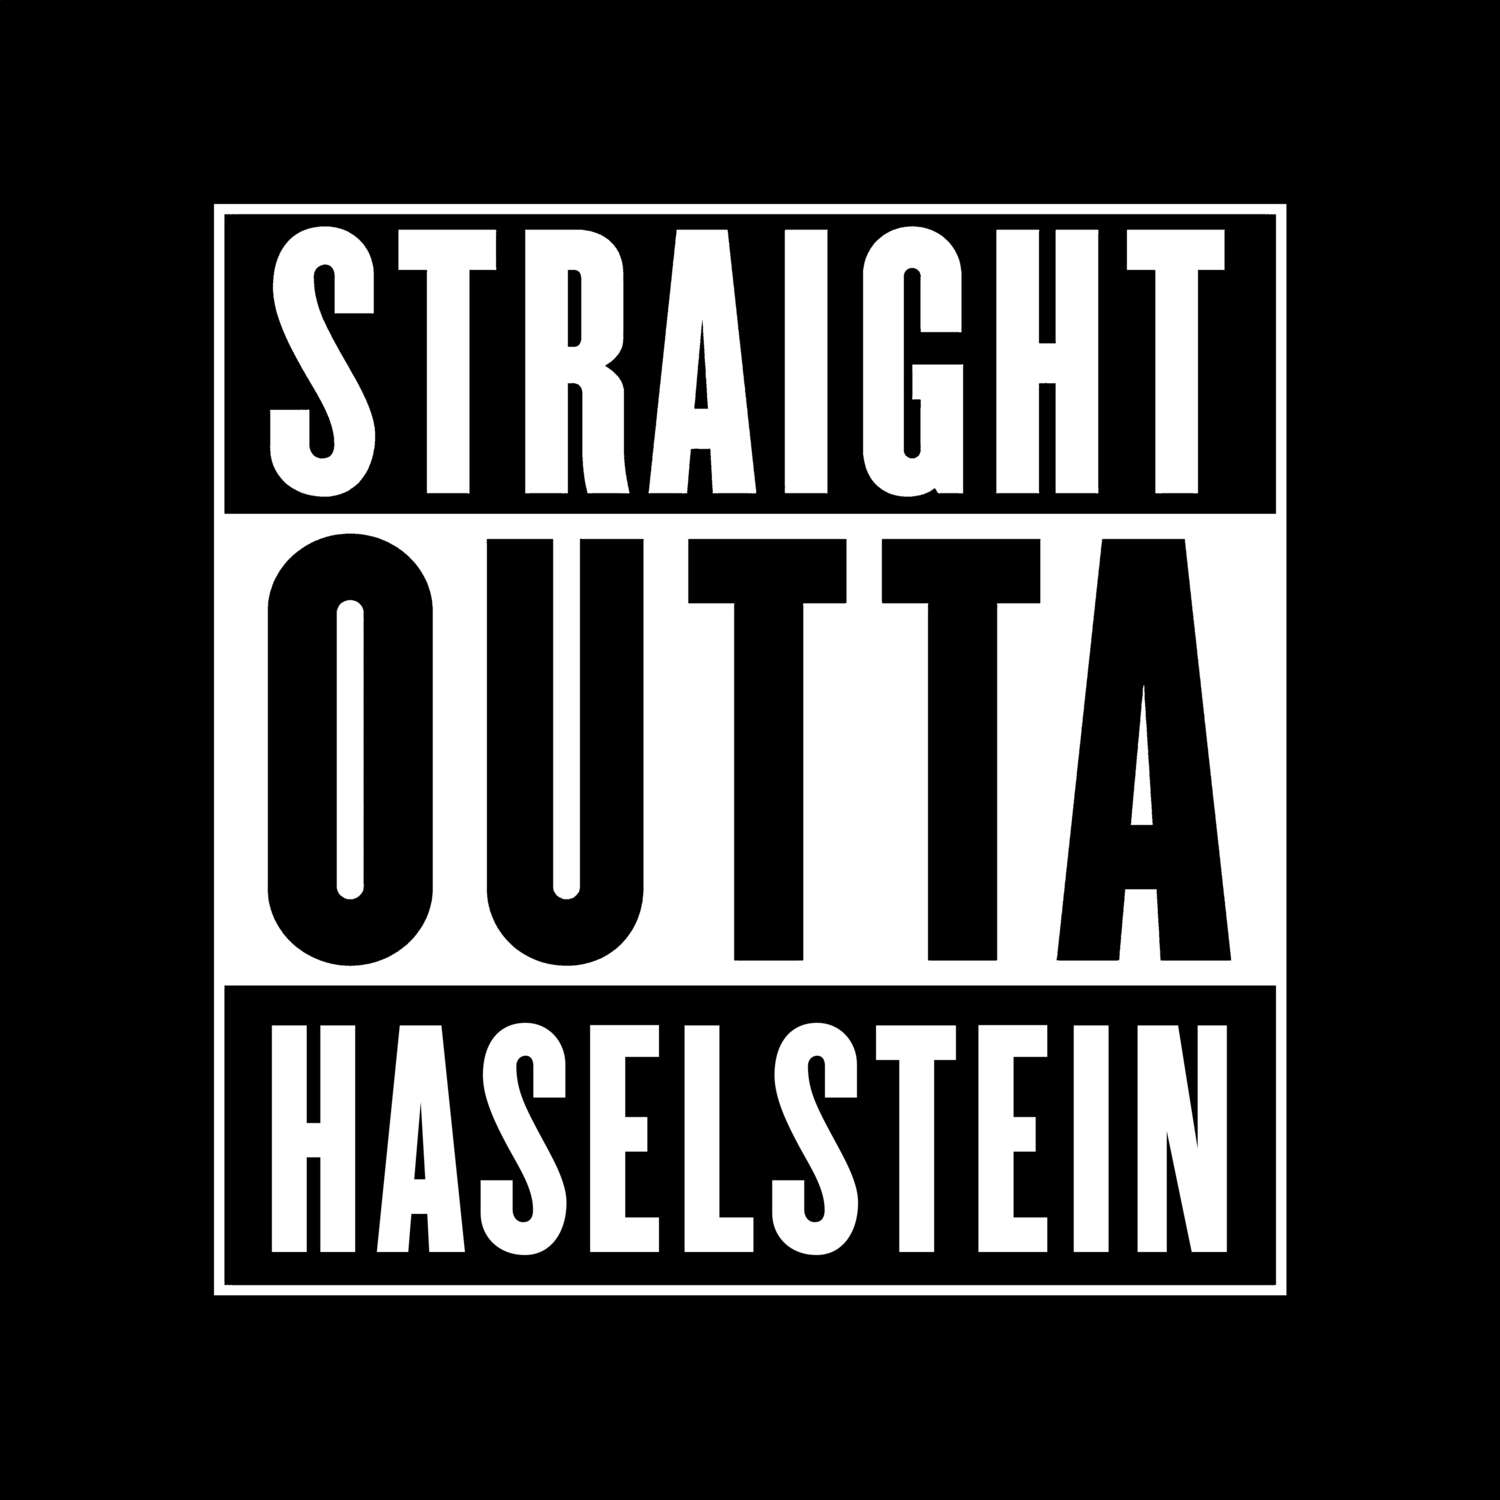 Haselstein T-Shirt »Straight Outta«